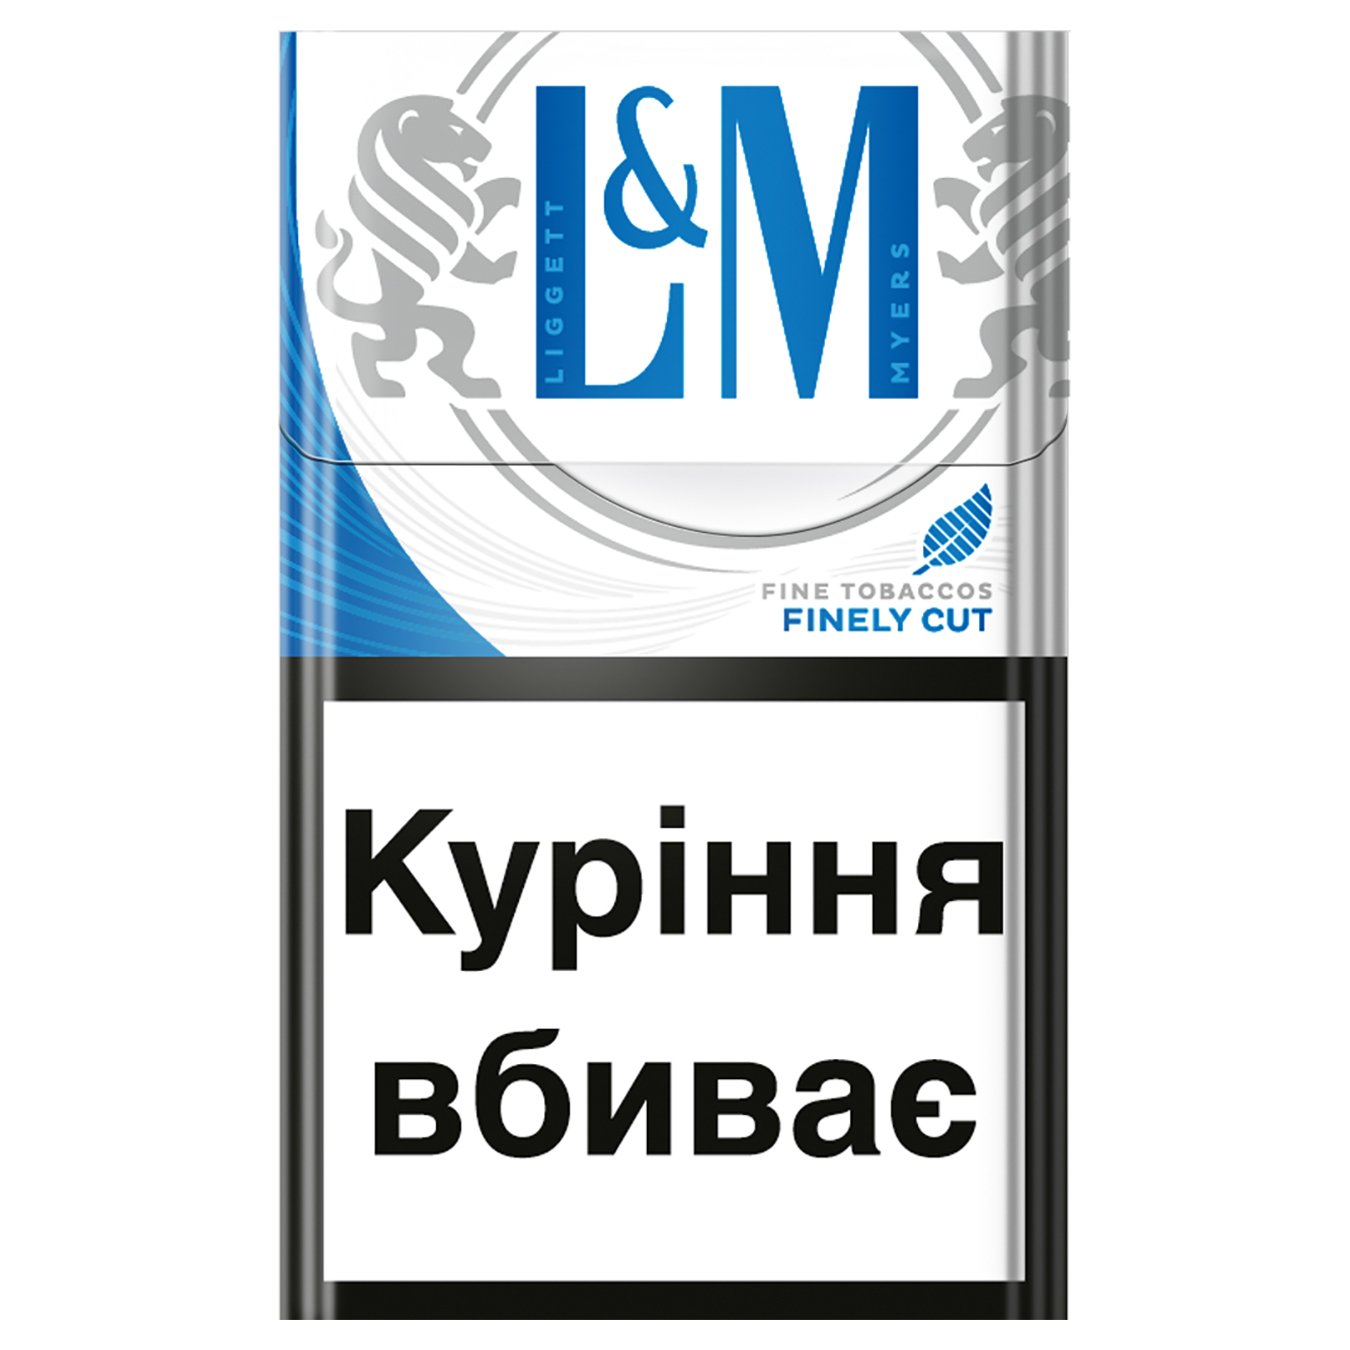 L&M Blue Label Cigarettes 20 pcs (the price is indicated without excise tax)